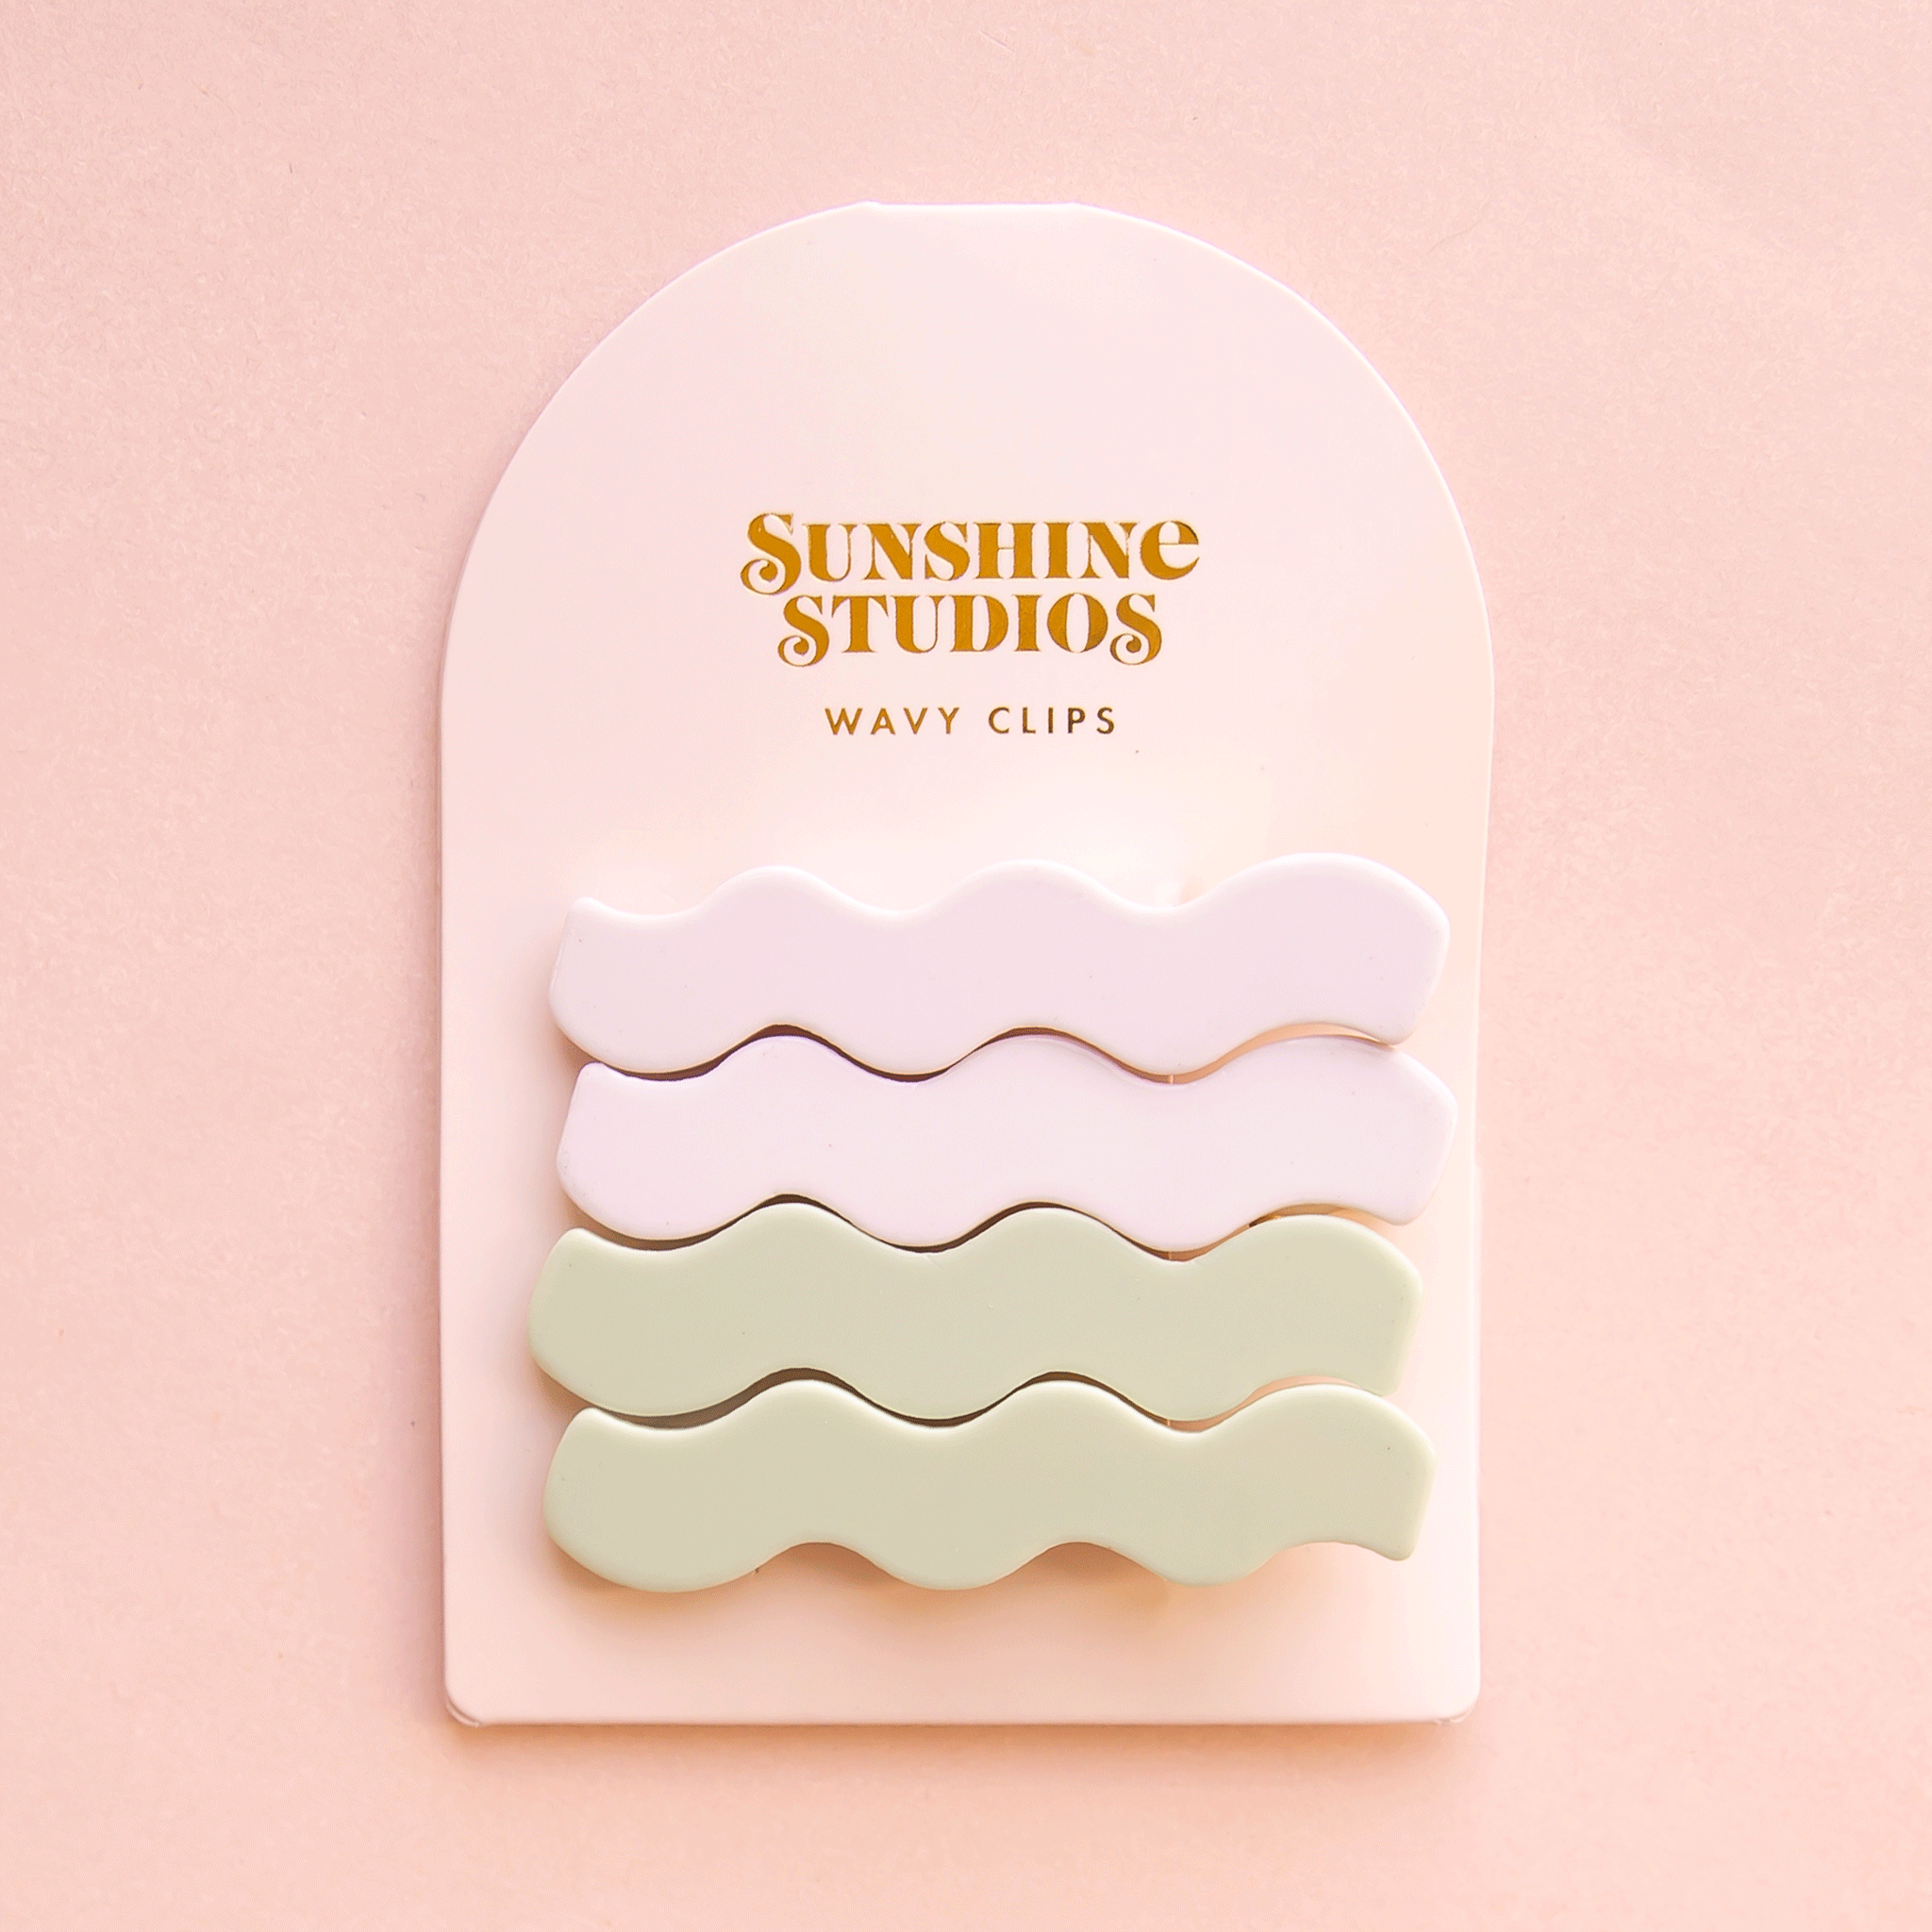 On a pink background is two sets of wavy shaped hair clips in a light green/blue shade and shade of white on an arched packaging with text along the top that reads, &quot;Sunshine Studios&quot;.